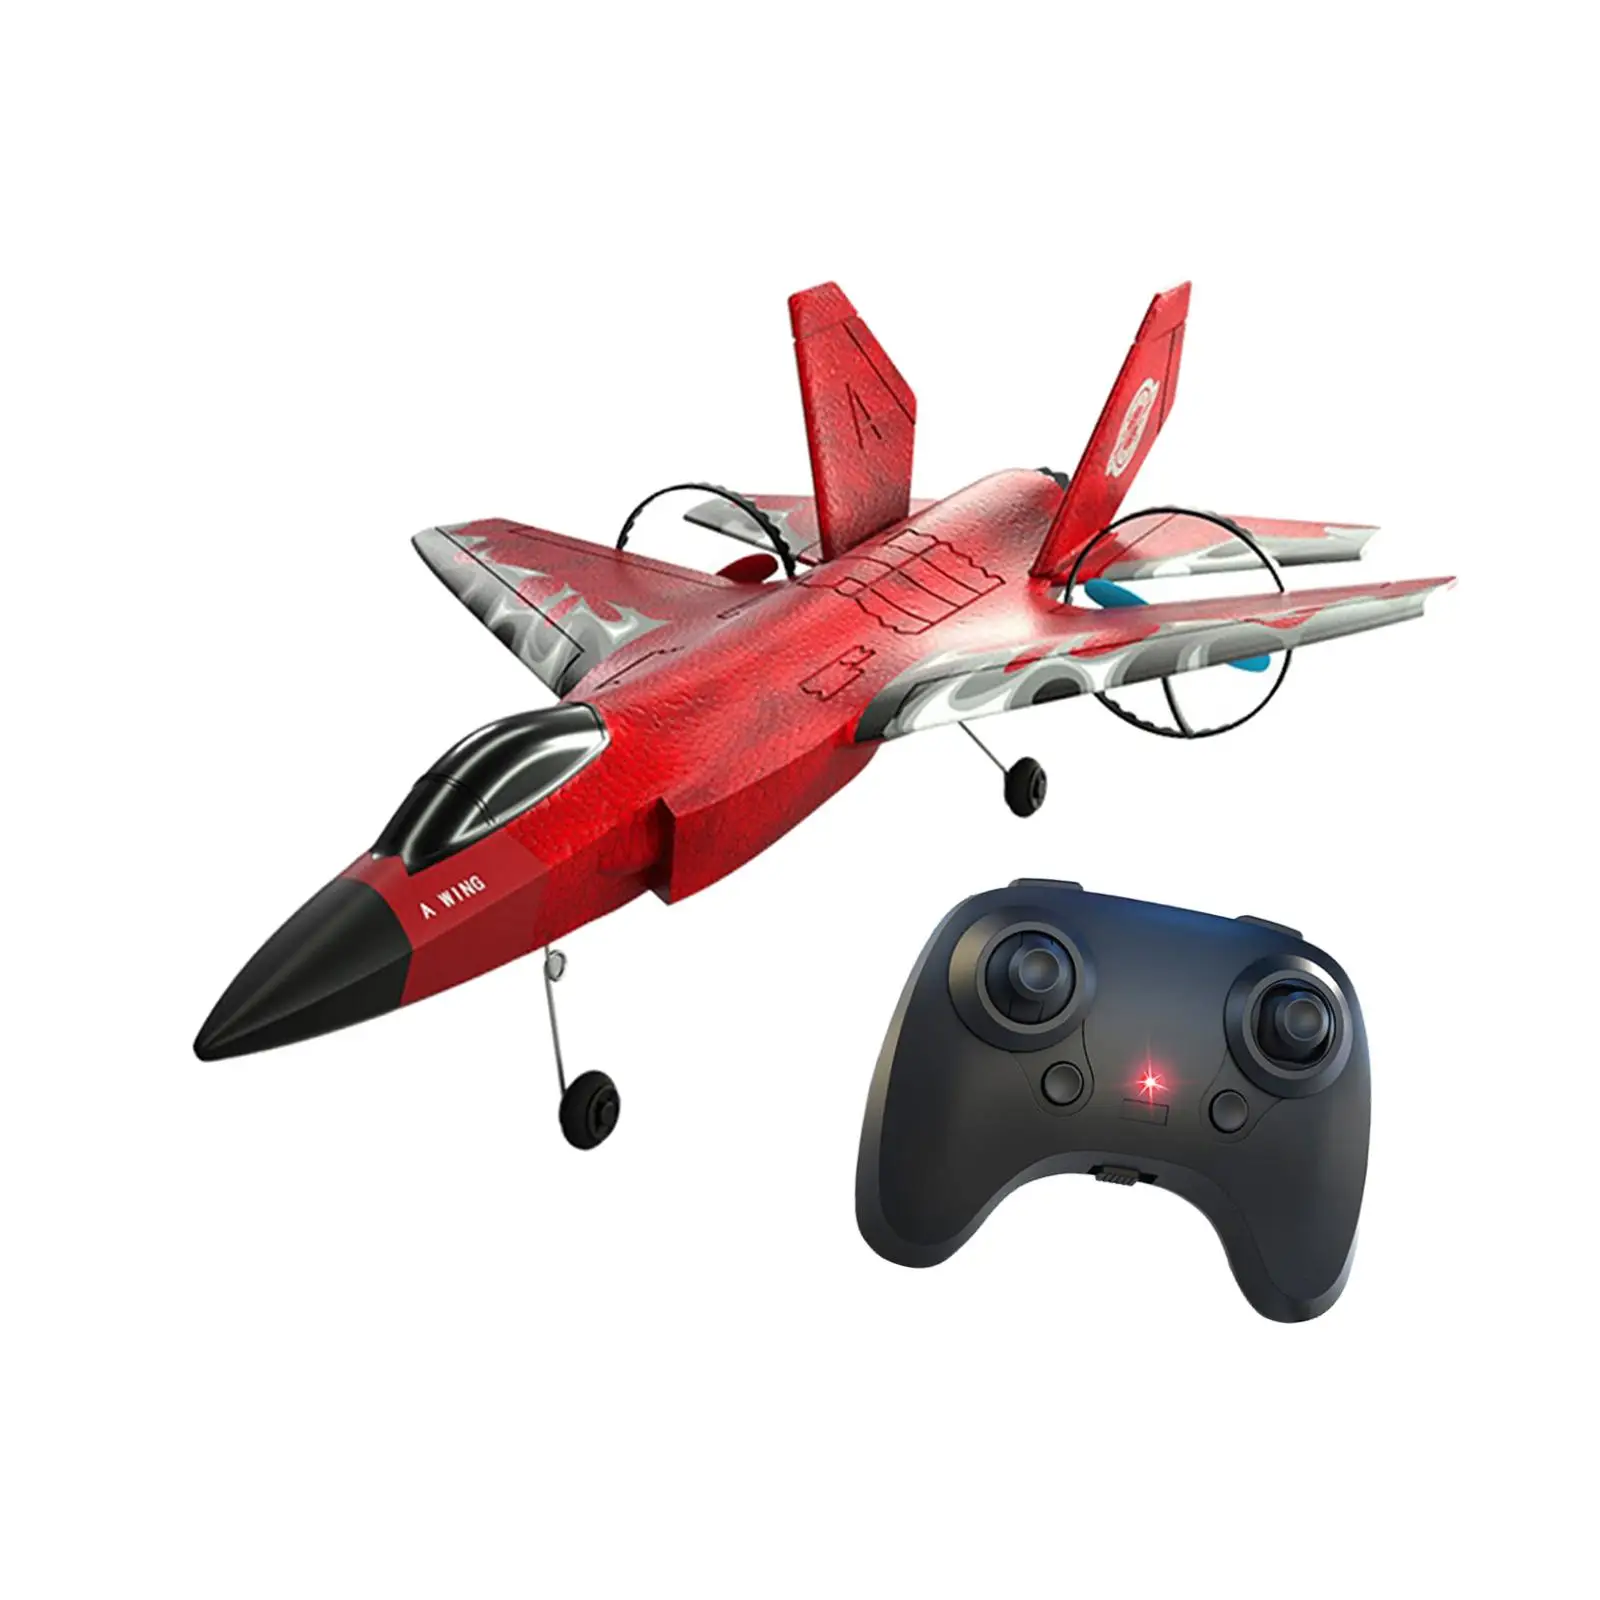 RC Glider Aircraft Easy to Fly Lightweight Ready to Fly Aircraft Remote Control Airplane Boys Girls Adults Kids Beginner